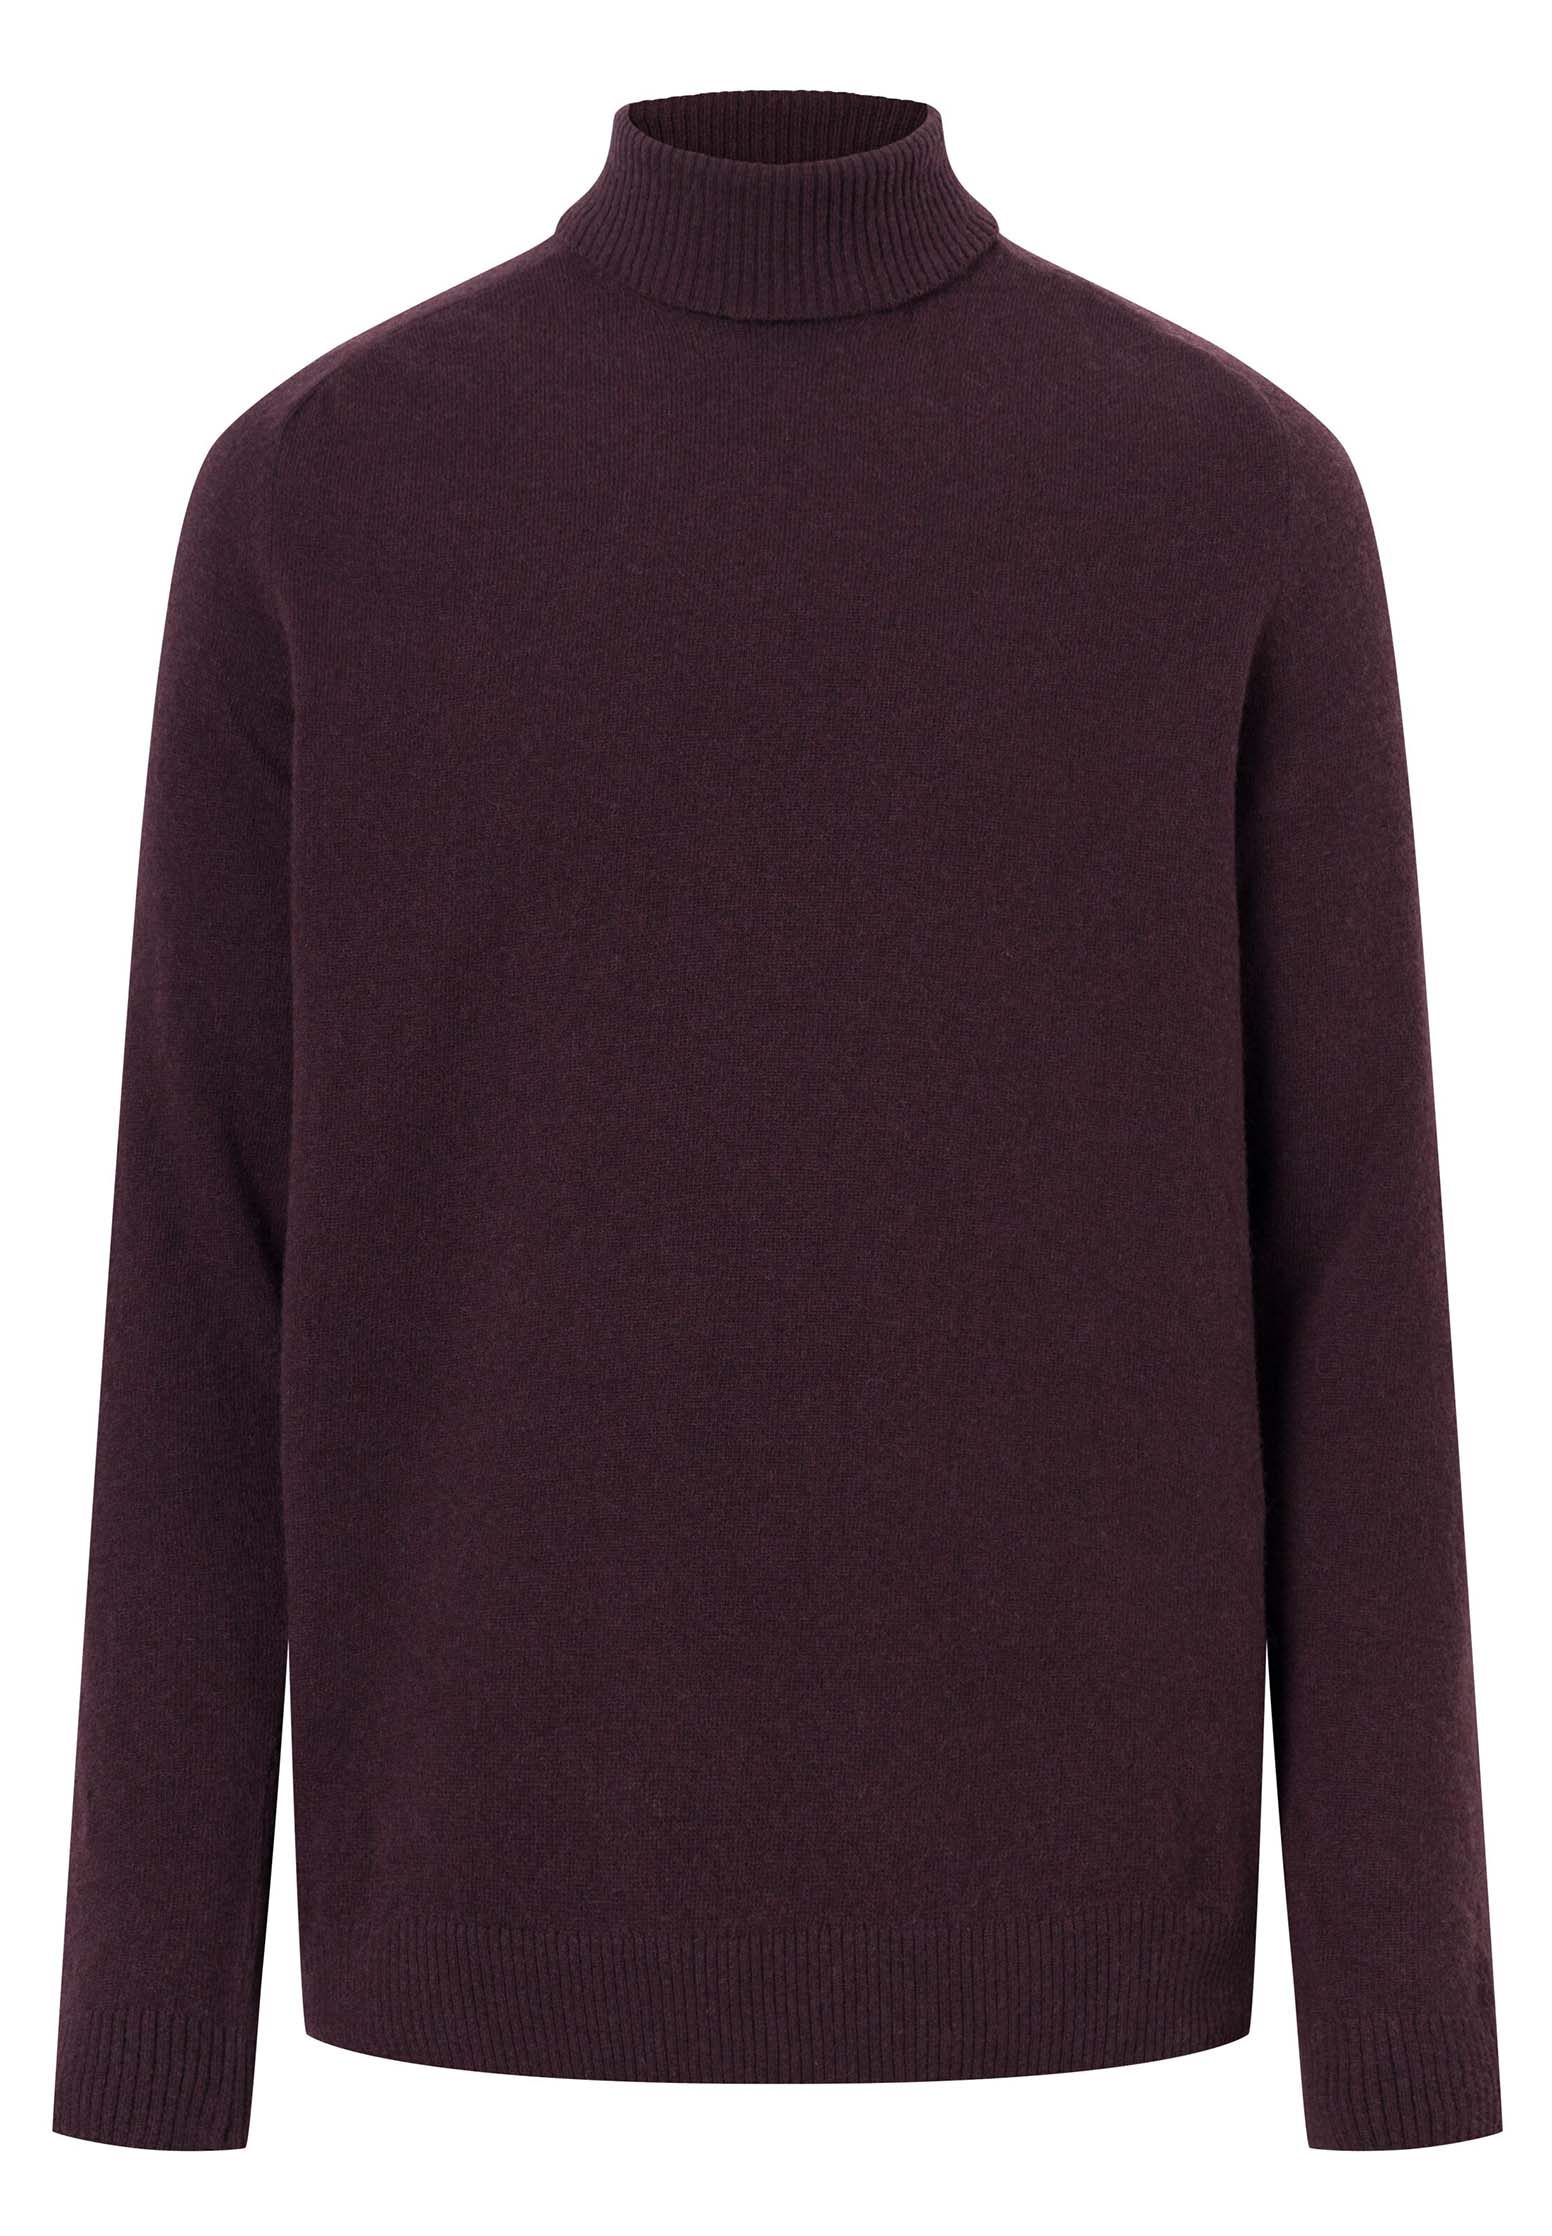 KNOWLEDGE COTTON APPAREL Roll Neck Knit deep mahogany S